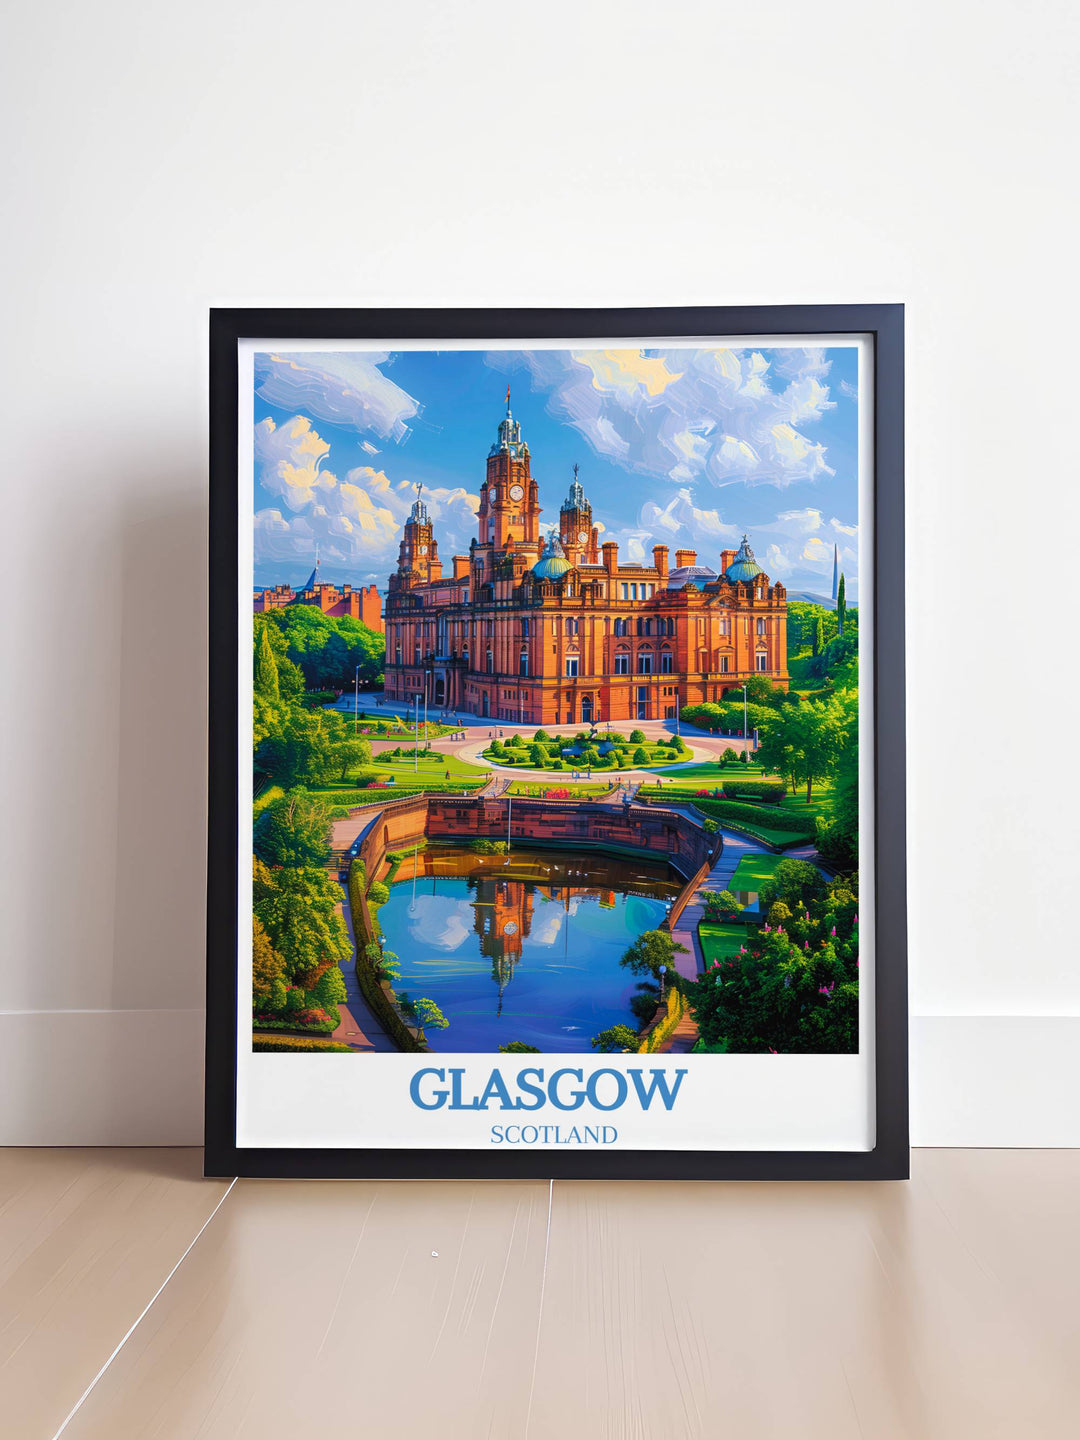 This Scotland wall art piece showcases Glasgows stunning architecture and scenic beauty, ideal for those looking to add a touch of Scottish charm to their collection of travel wall art and Glasgow prints